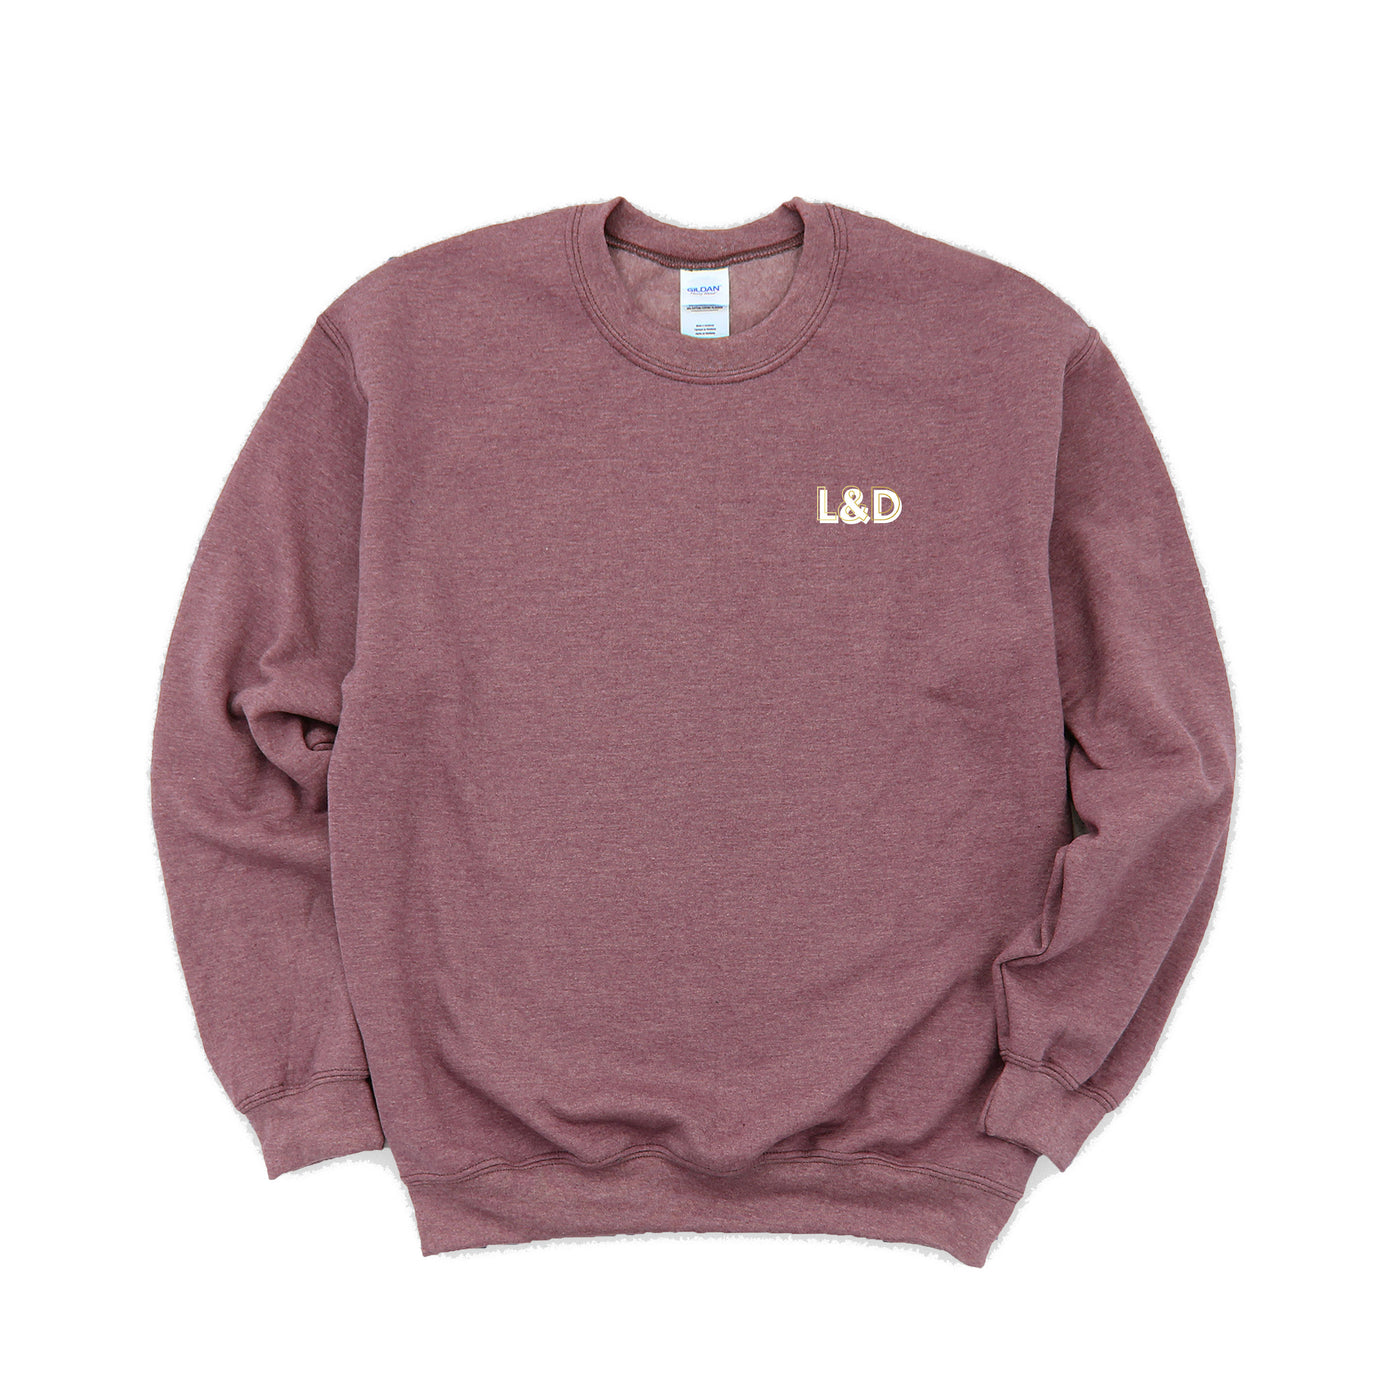 L&D Creds - Non-Pocketed Crew Sweatshirt